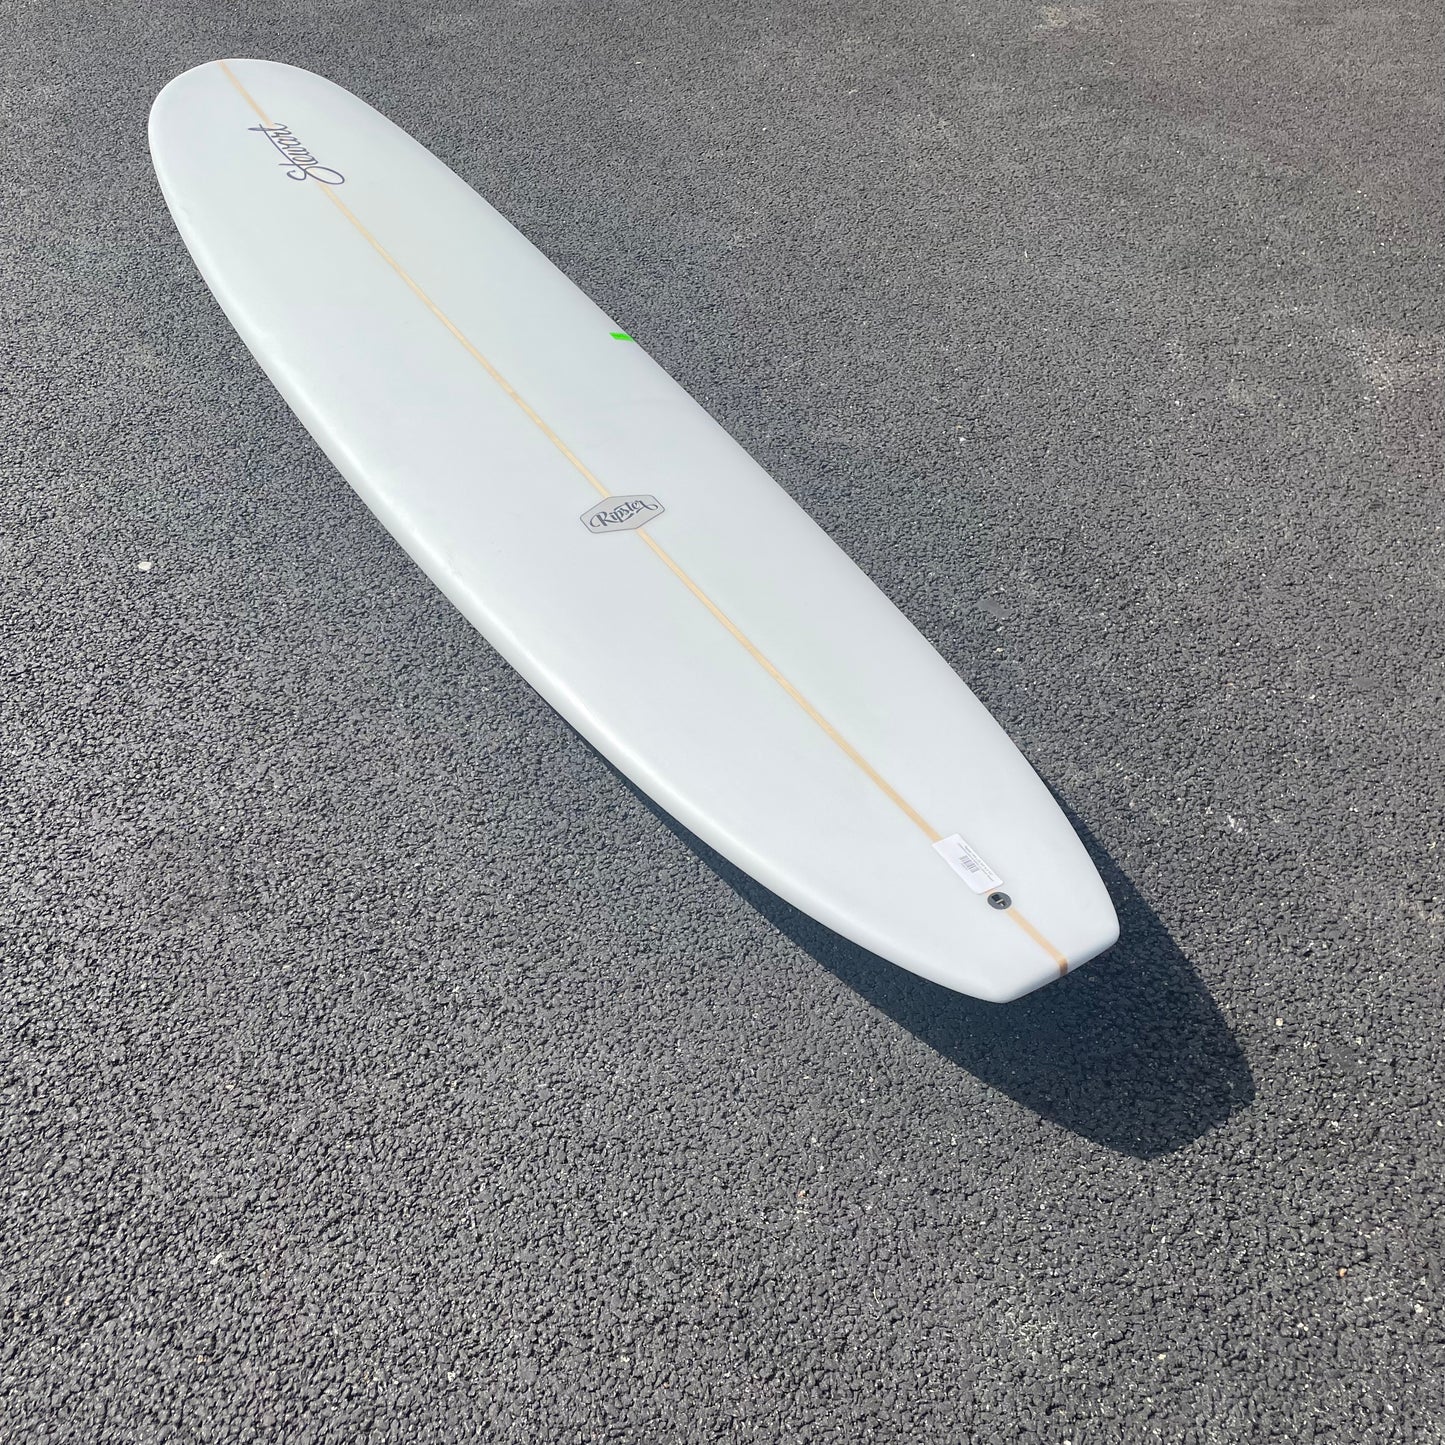 Ripster | 9'4 x 23 3/4" X 3 1/4"